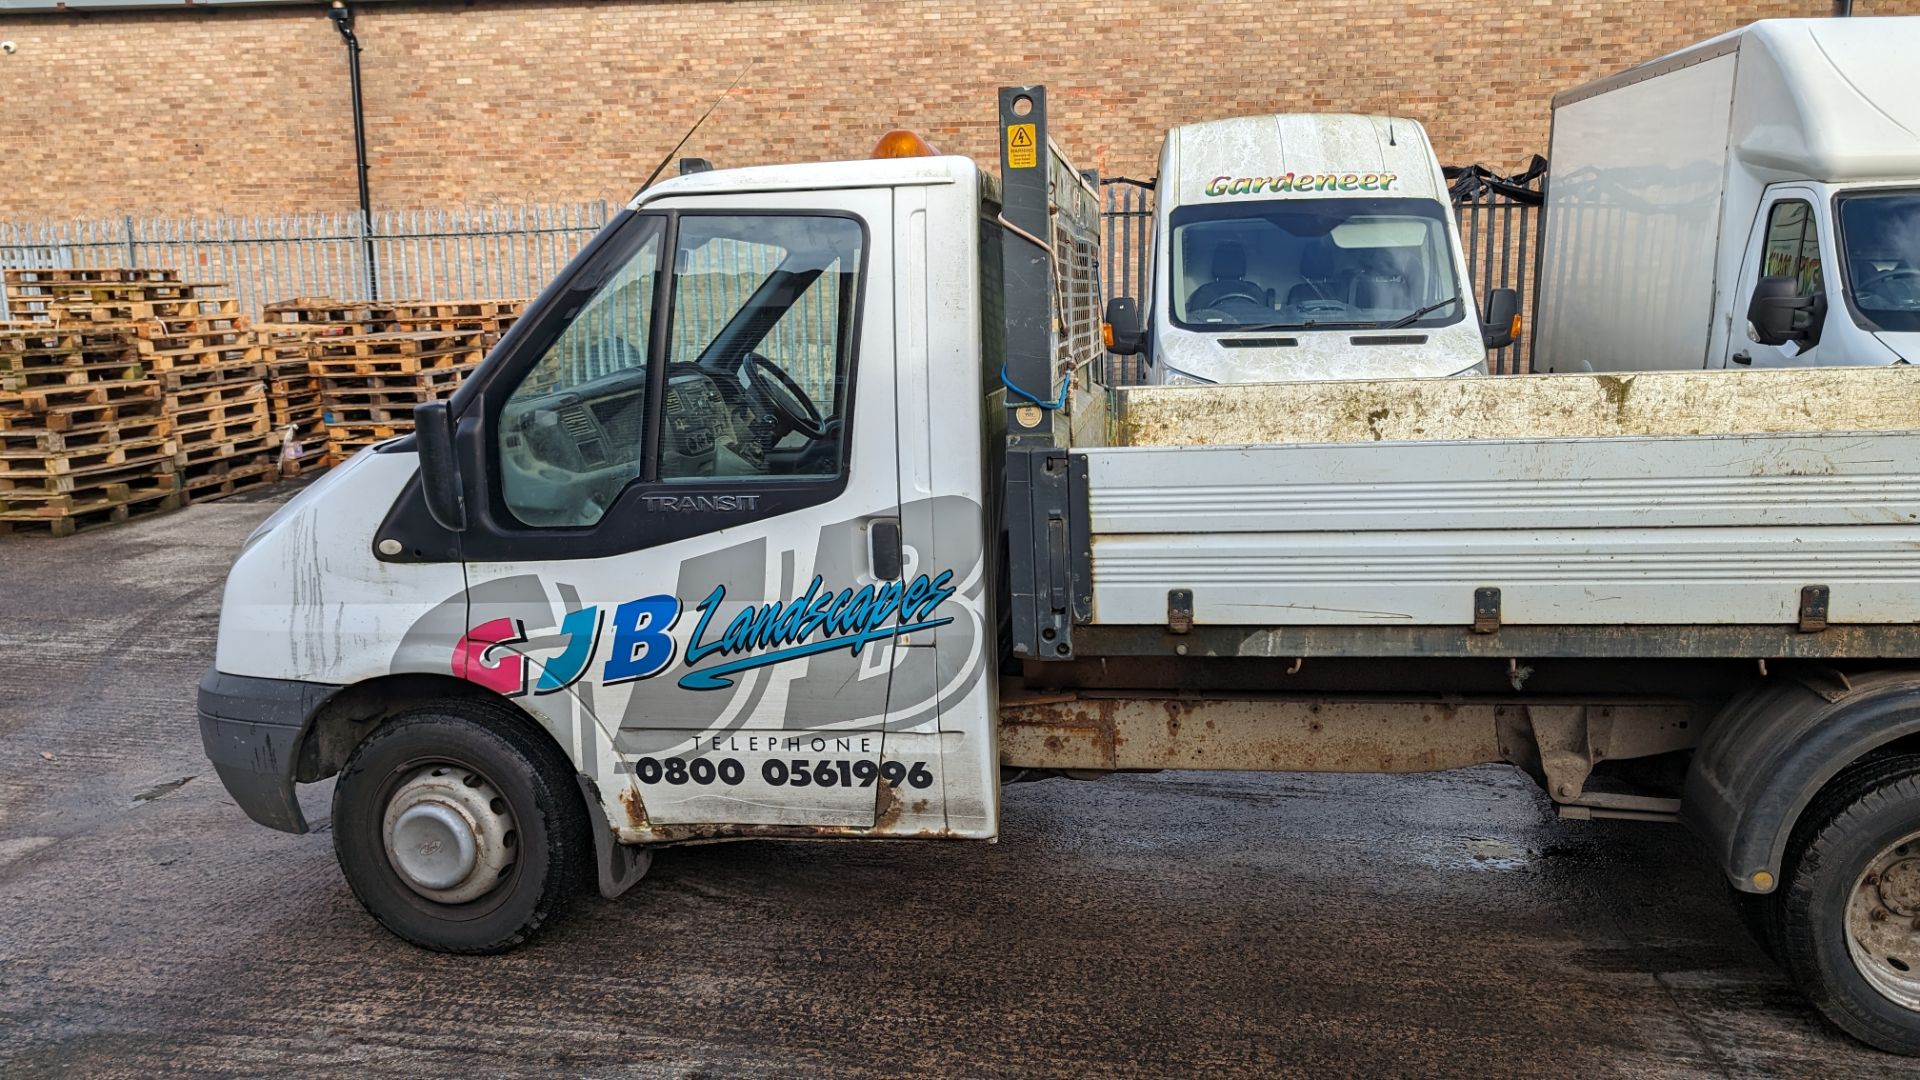 2011 Ford Transit Dropside Tipper - Image 4 of 24